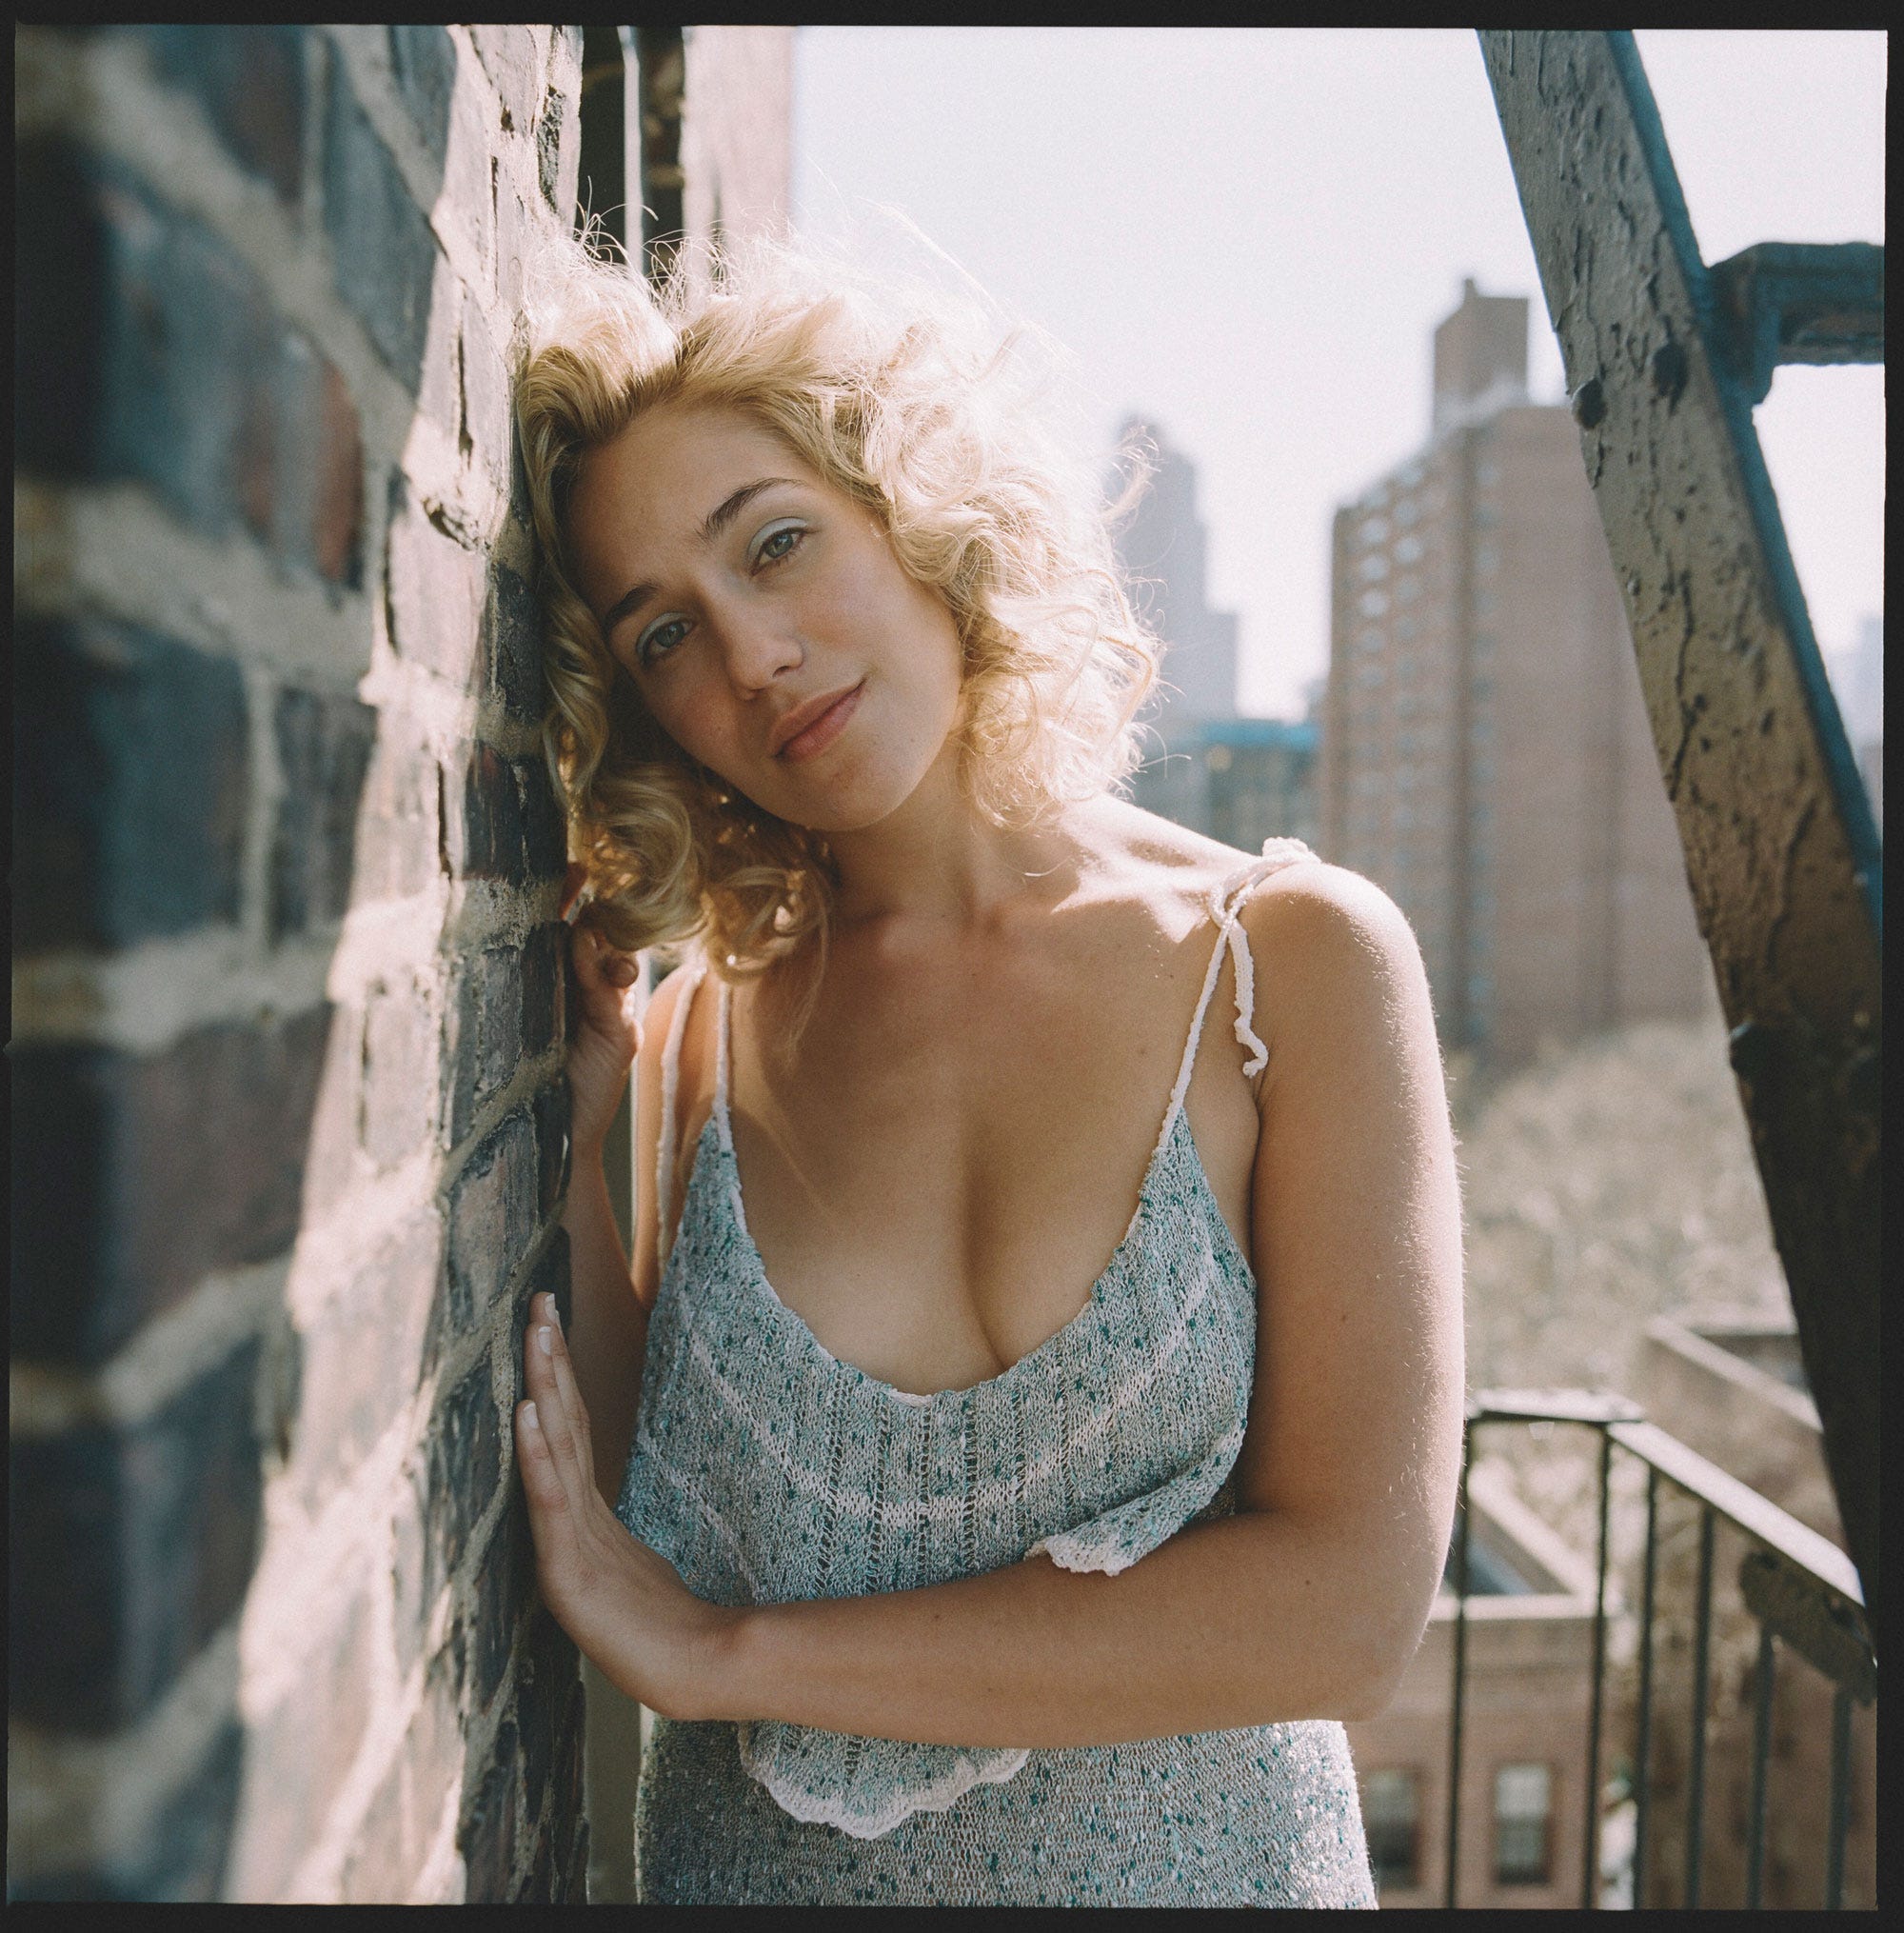 Lola Kirke during a photoshoot.